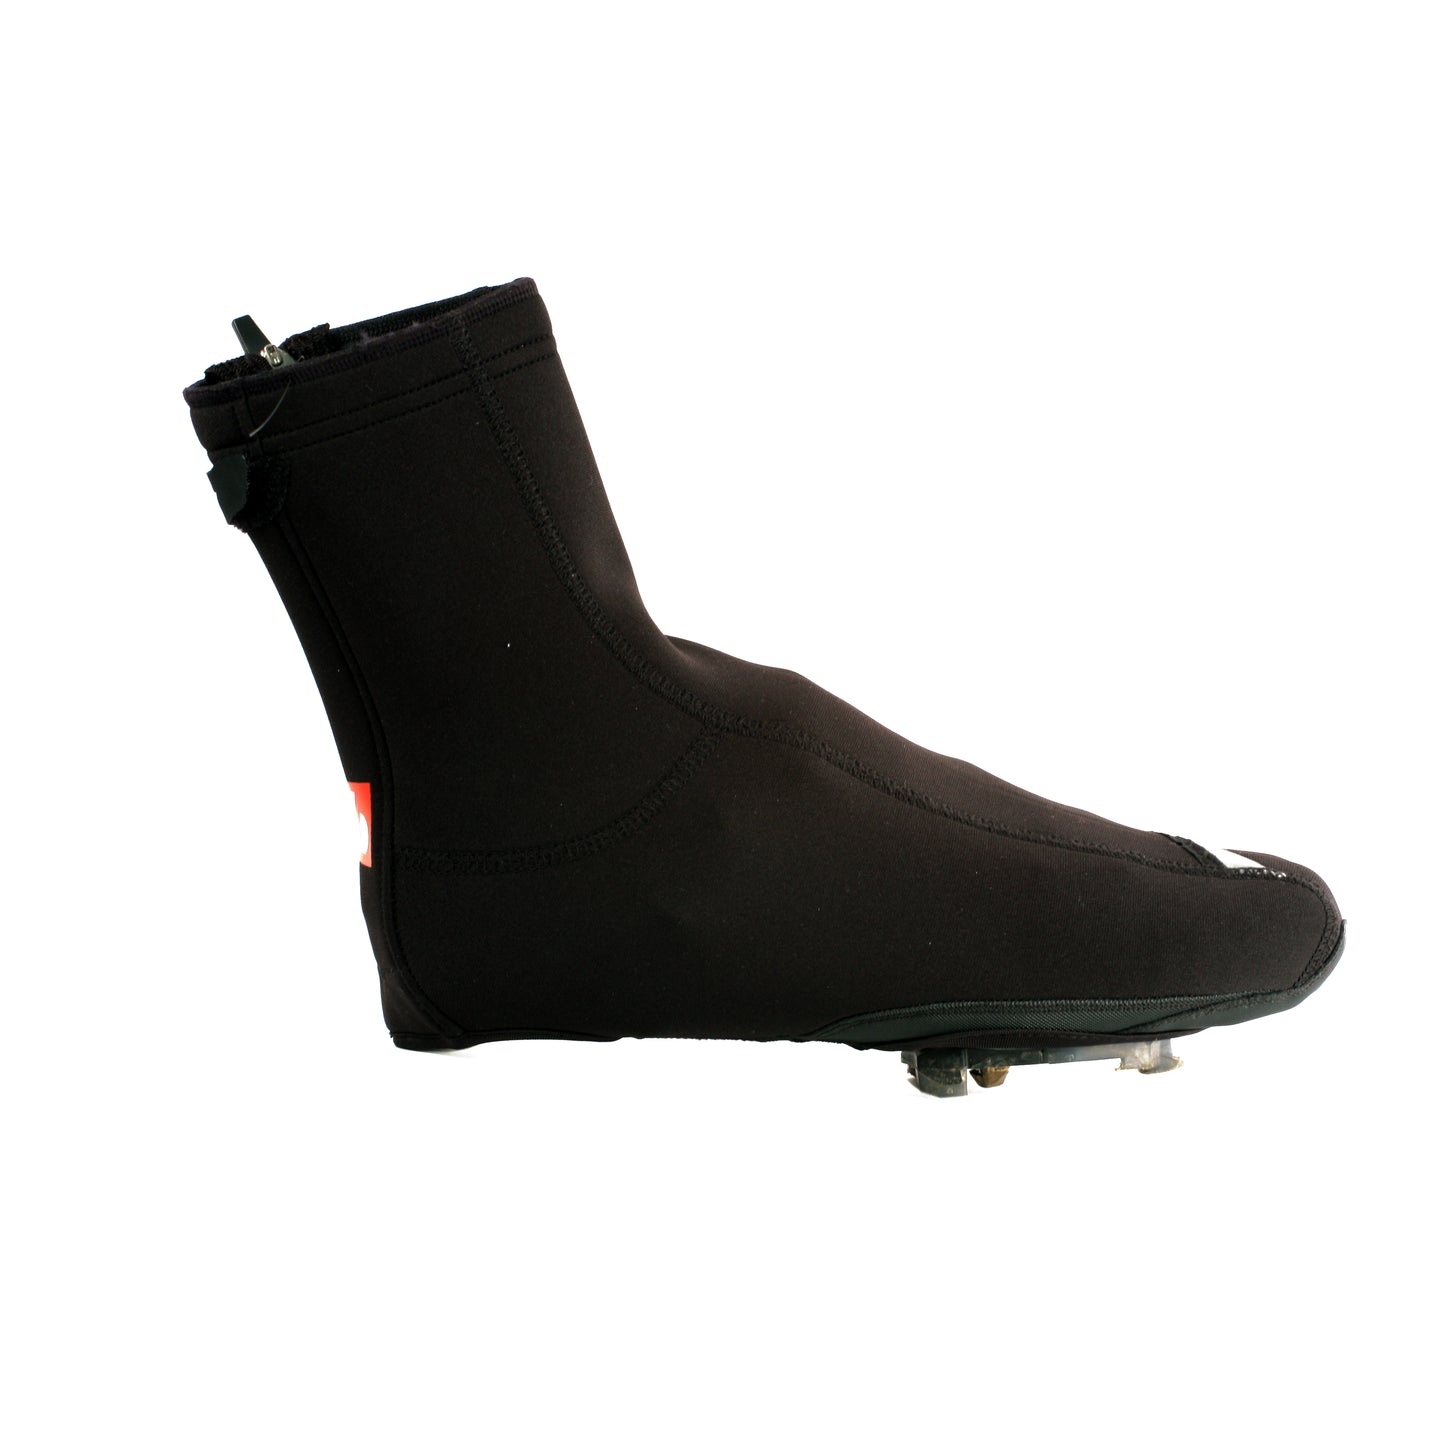 BSP-03 Cycling overshoes, Warm and water-repellent.